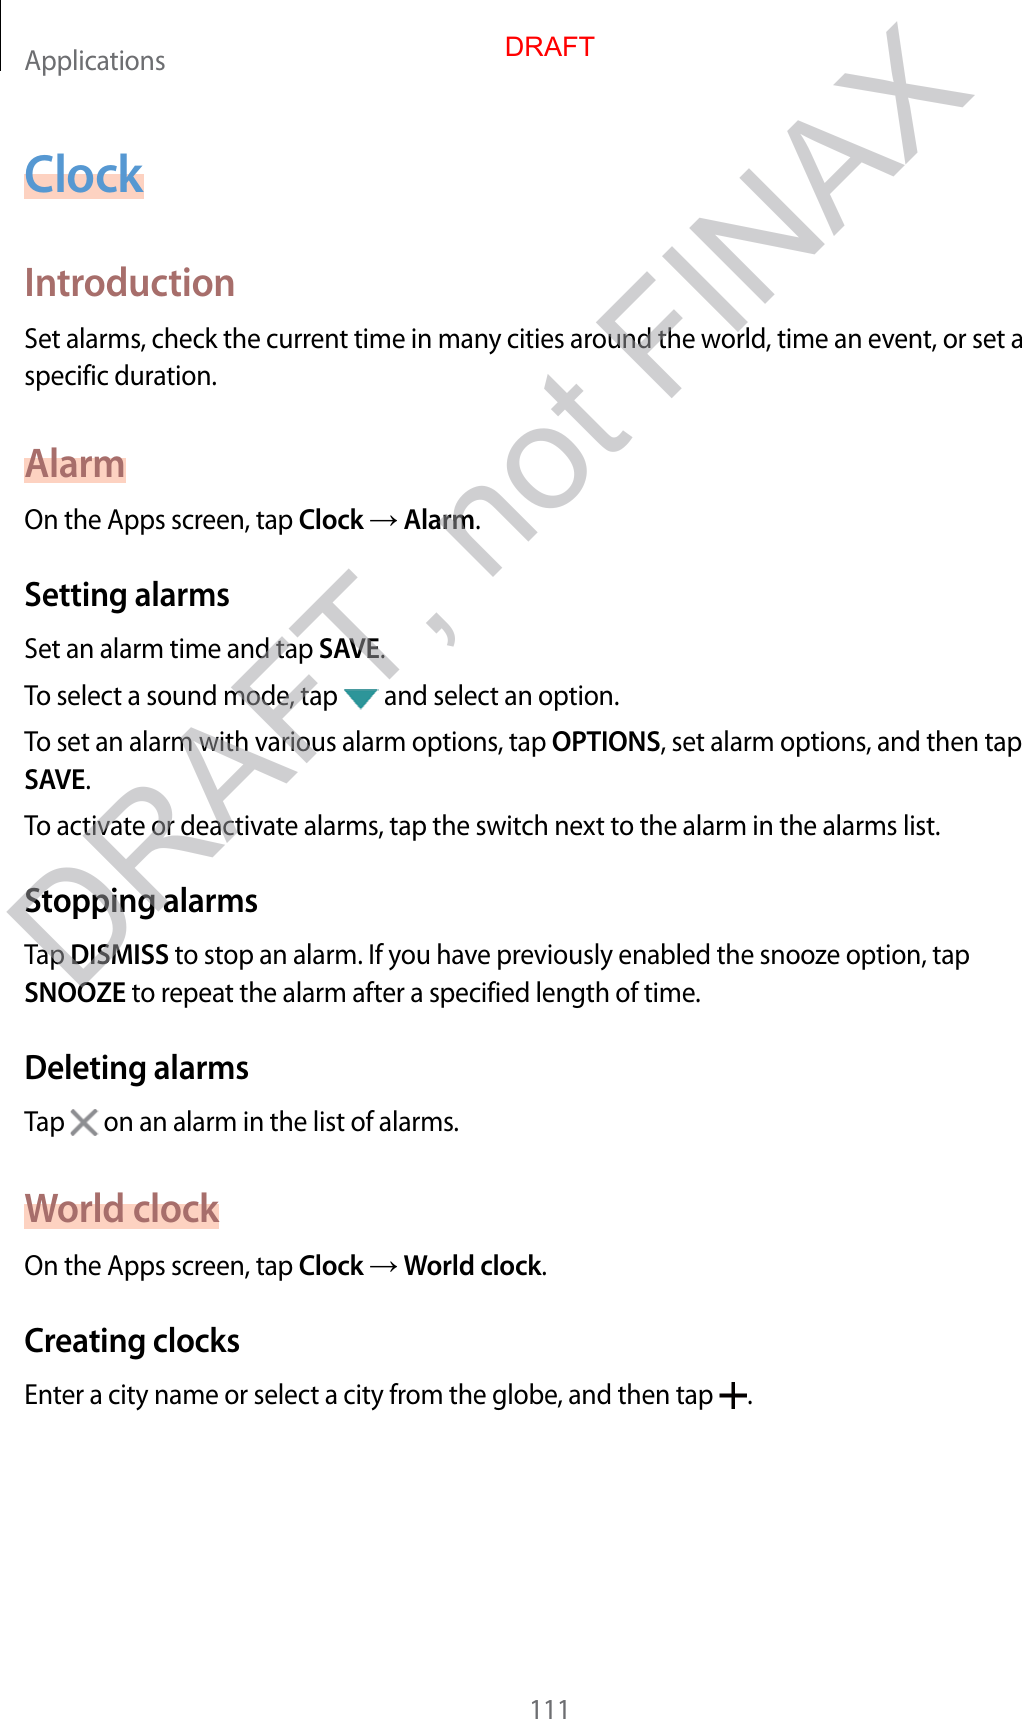 Applications111ClockIntroductionSet alarms, check the current time in many cities around the world, time an event, or set a specific duration.AlarmOn the Apps screen, tap Clock  Alarm.Setting alarmsSet an alarm time and tap SAVE.To select a sound mode, tap   and select an option.To set an alarm with various alarm options, tap OPTIONS, set alarm options, and then tap SAVE.To activate or deactivate alarms, tap the switch next to the alarm in the alarms list.Stopping alarmsTap DISMISS to stop an alarm. If you have previously enabled the snooze option, tap SNOOZE to repeat the alarm after a specified length of time.Deleting alarmsTap   on an alarm in the list of alarms.World clockOn the Apps screen, tap Clock  World clock.Creating clocksEnter a city name or select a city from the globe, and then tap  .DRAFTDRAFT, not FINAX